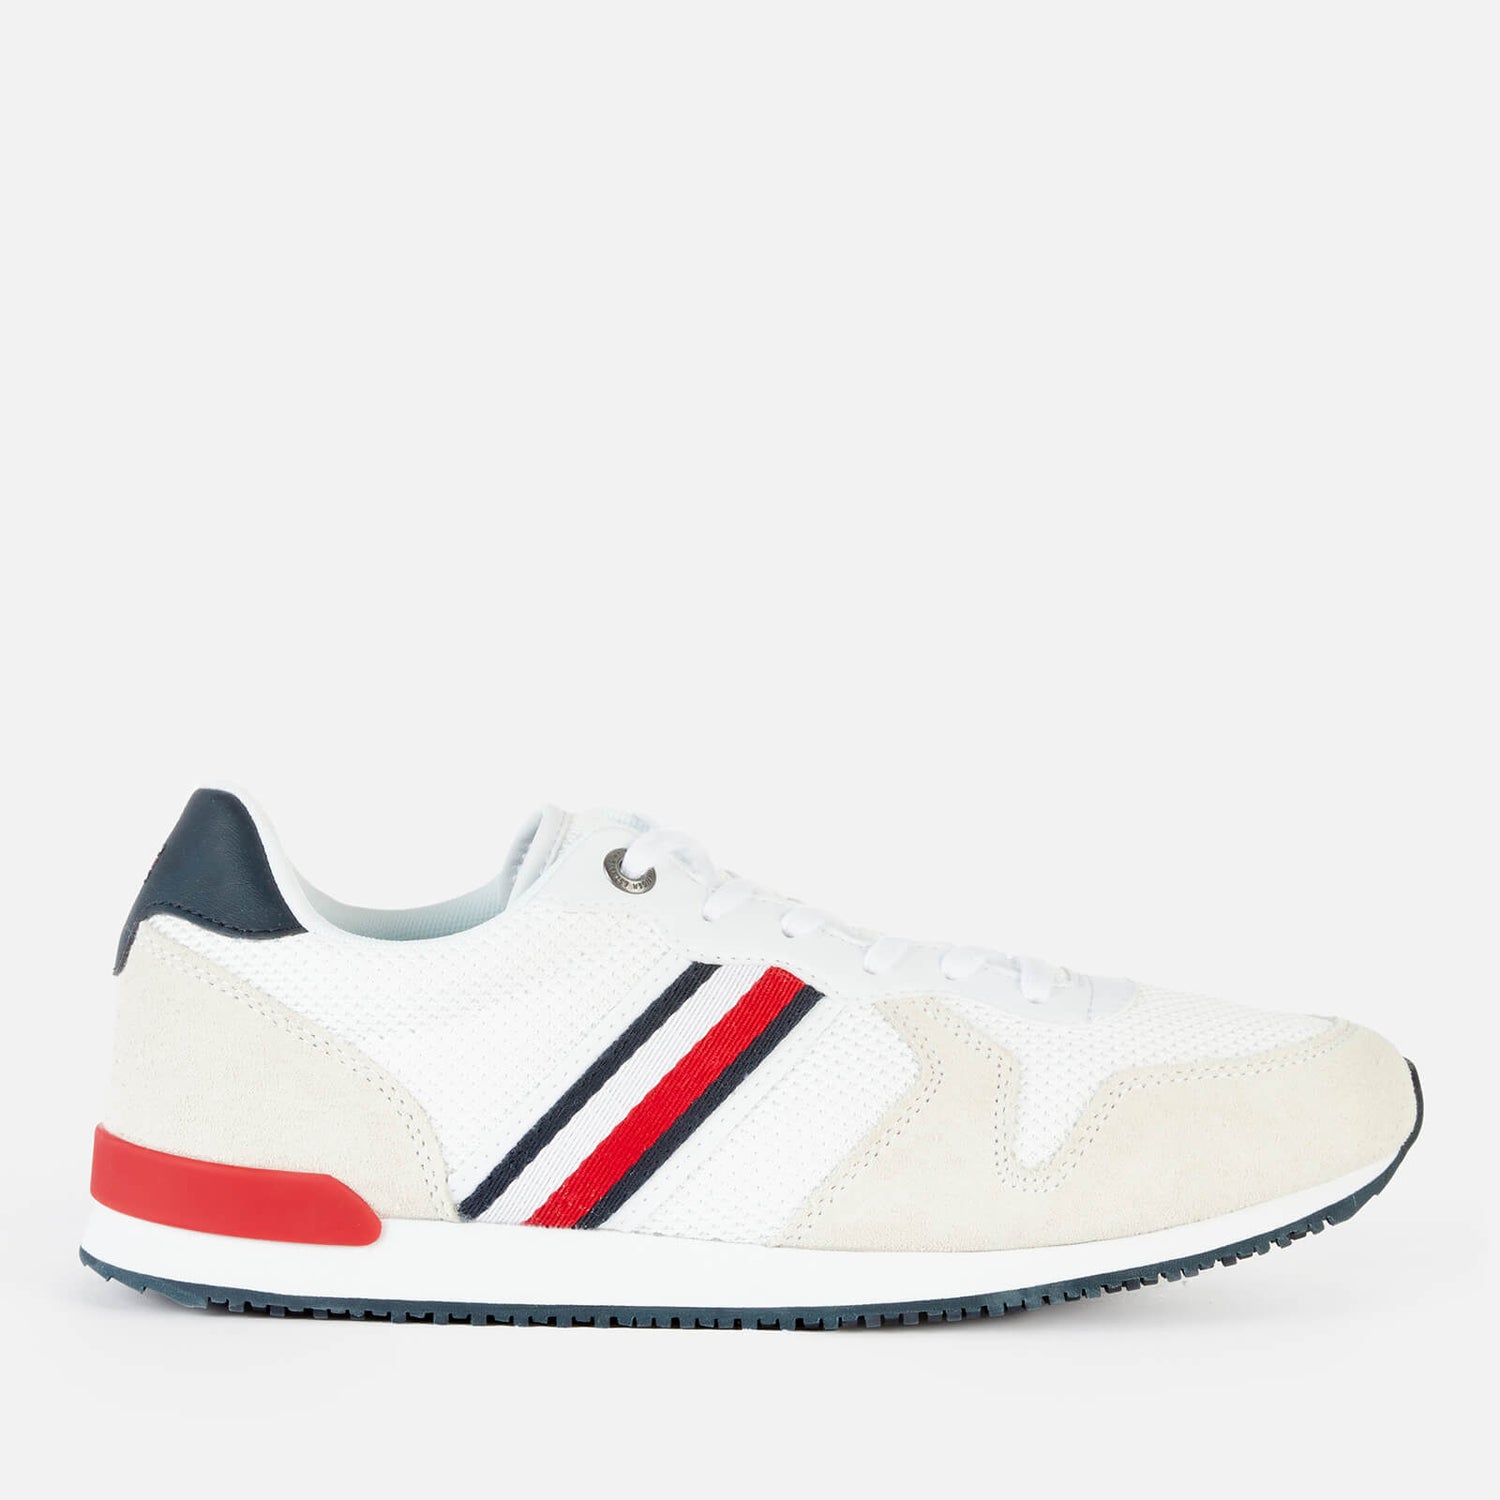 Tommy Hilfiger Men's Iconic Material Mix Running Style Trainers - Red/White/Blue